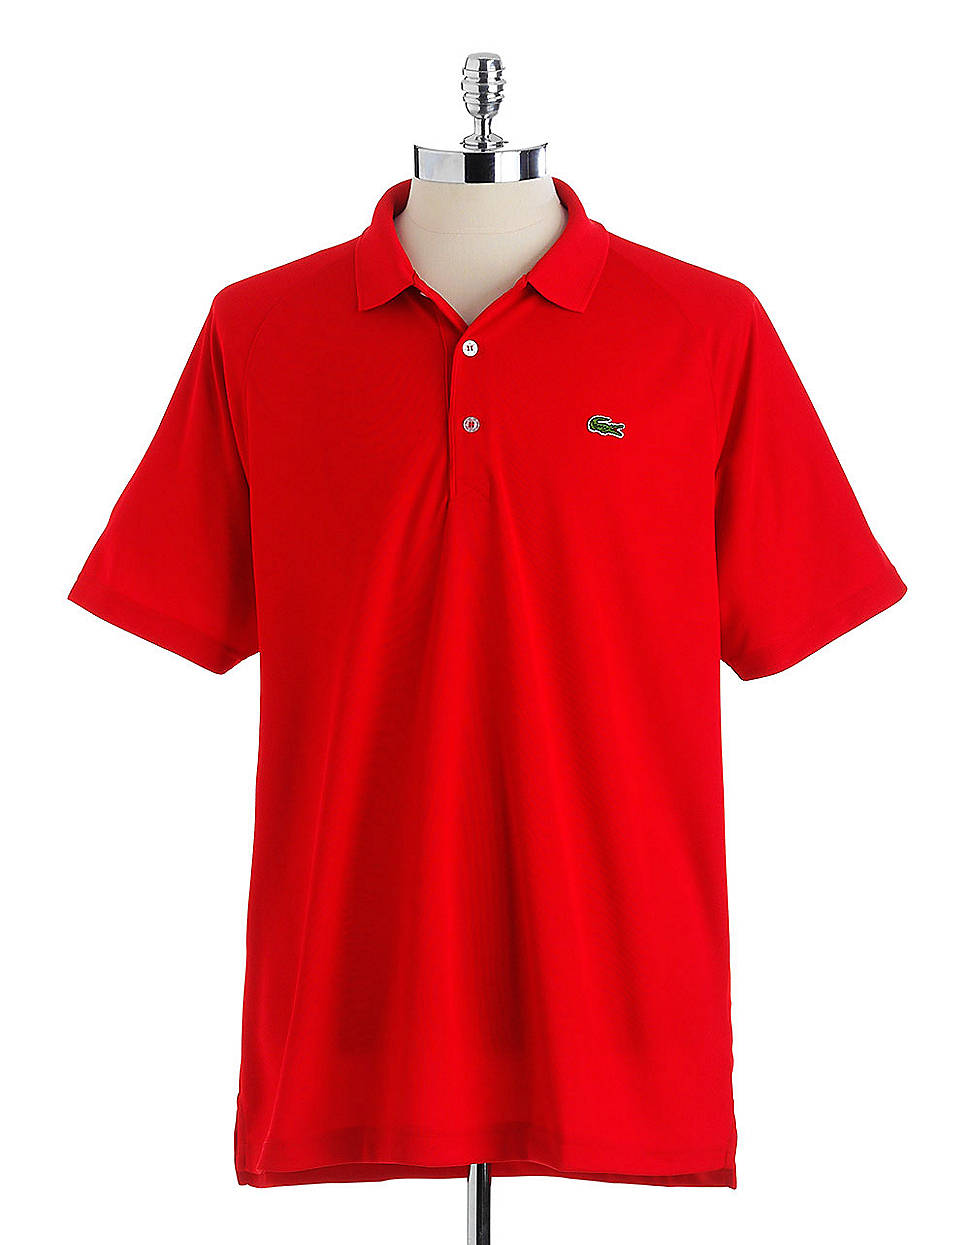 Lyst - Lacoste Performance Polo Shirt in Red for Men